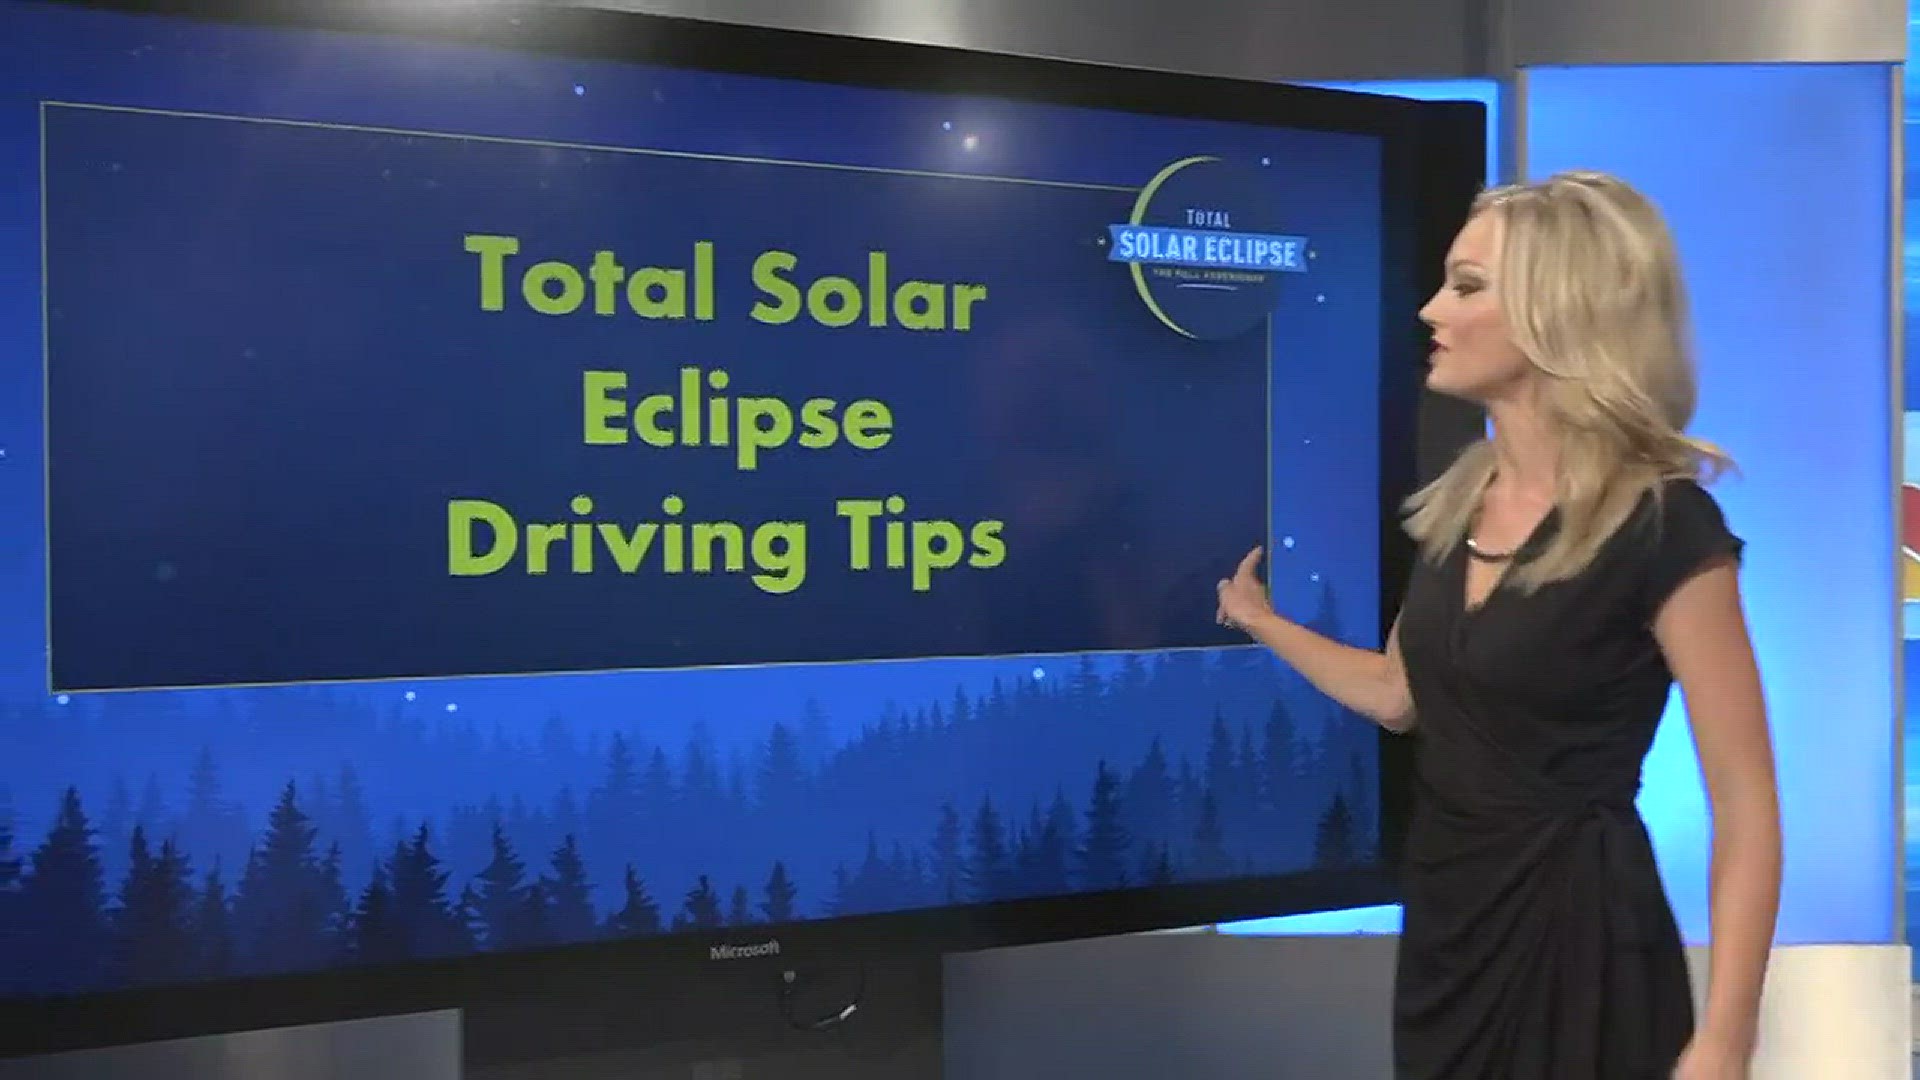 If you're taking a road trip to view the total solar eclipse, here are a few tips law enforcement want you to follow.